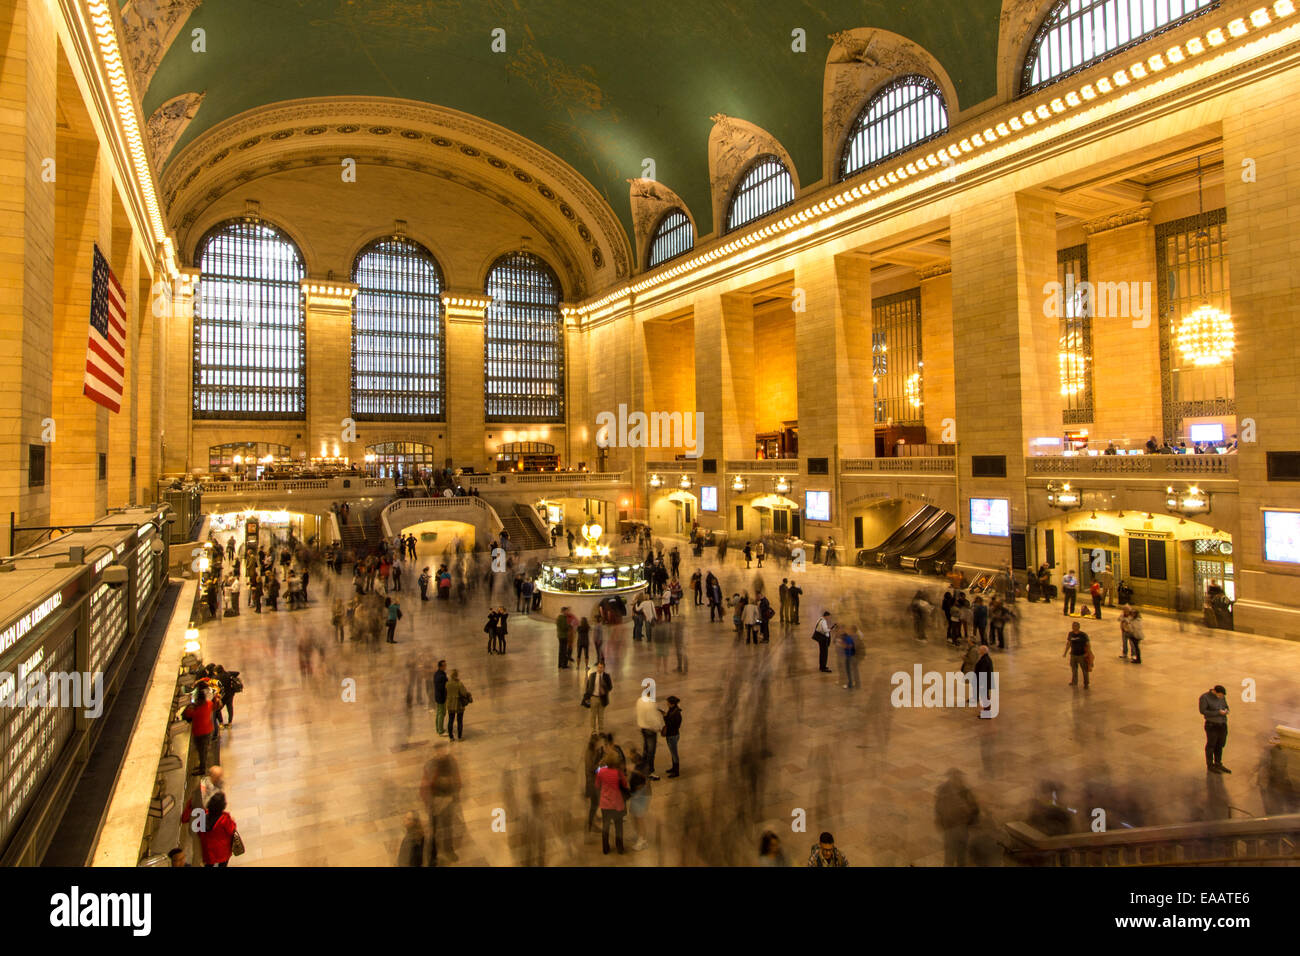 Grand Central Station, New York City, United States Stock Photo